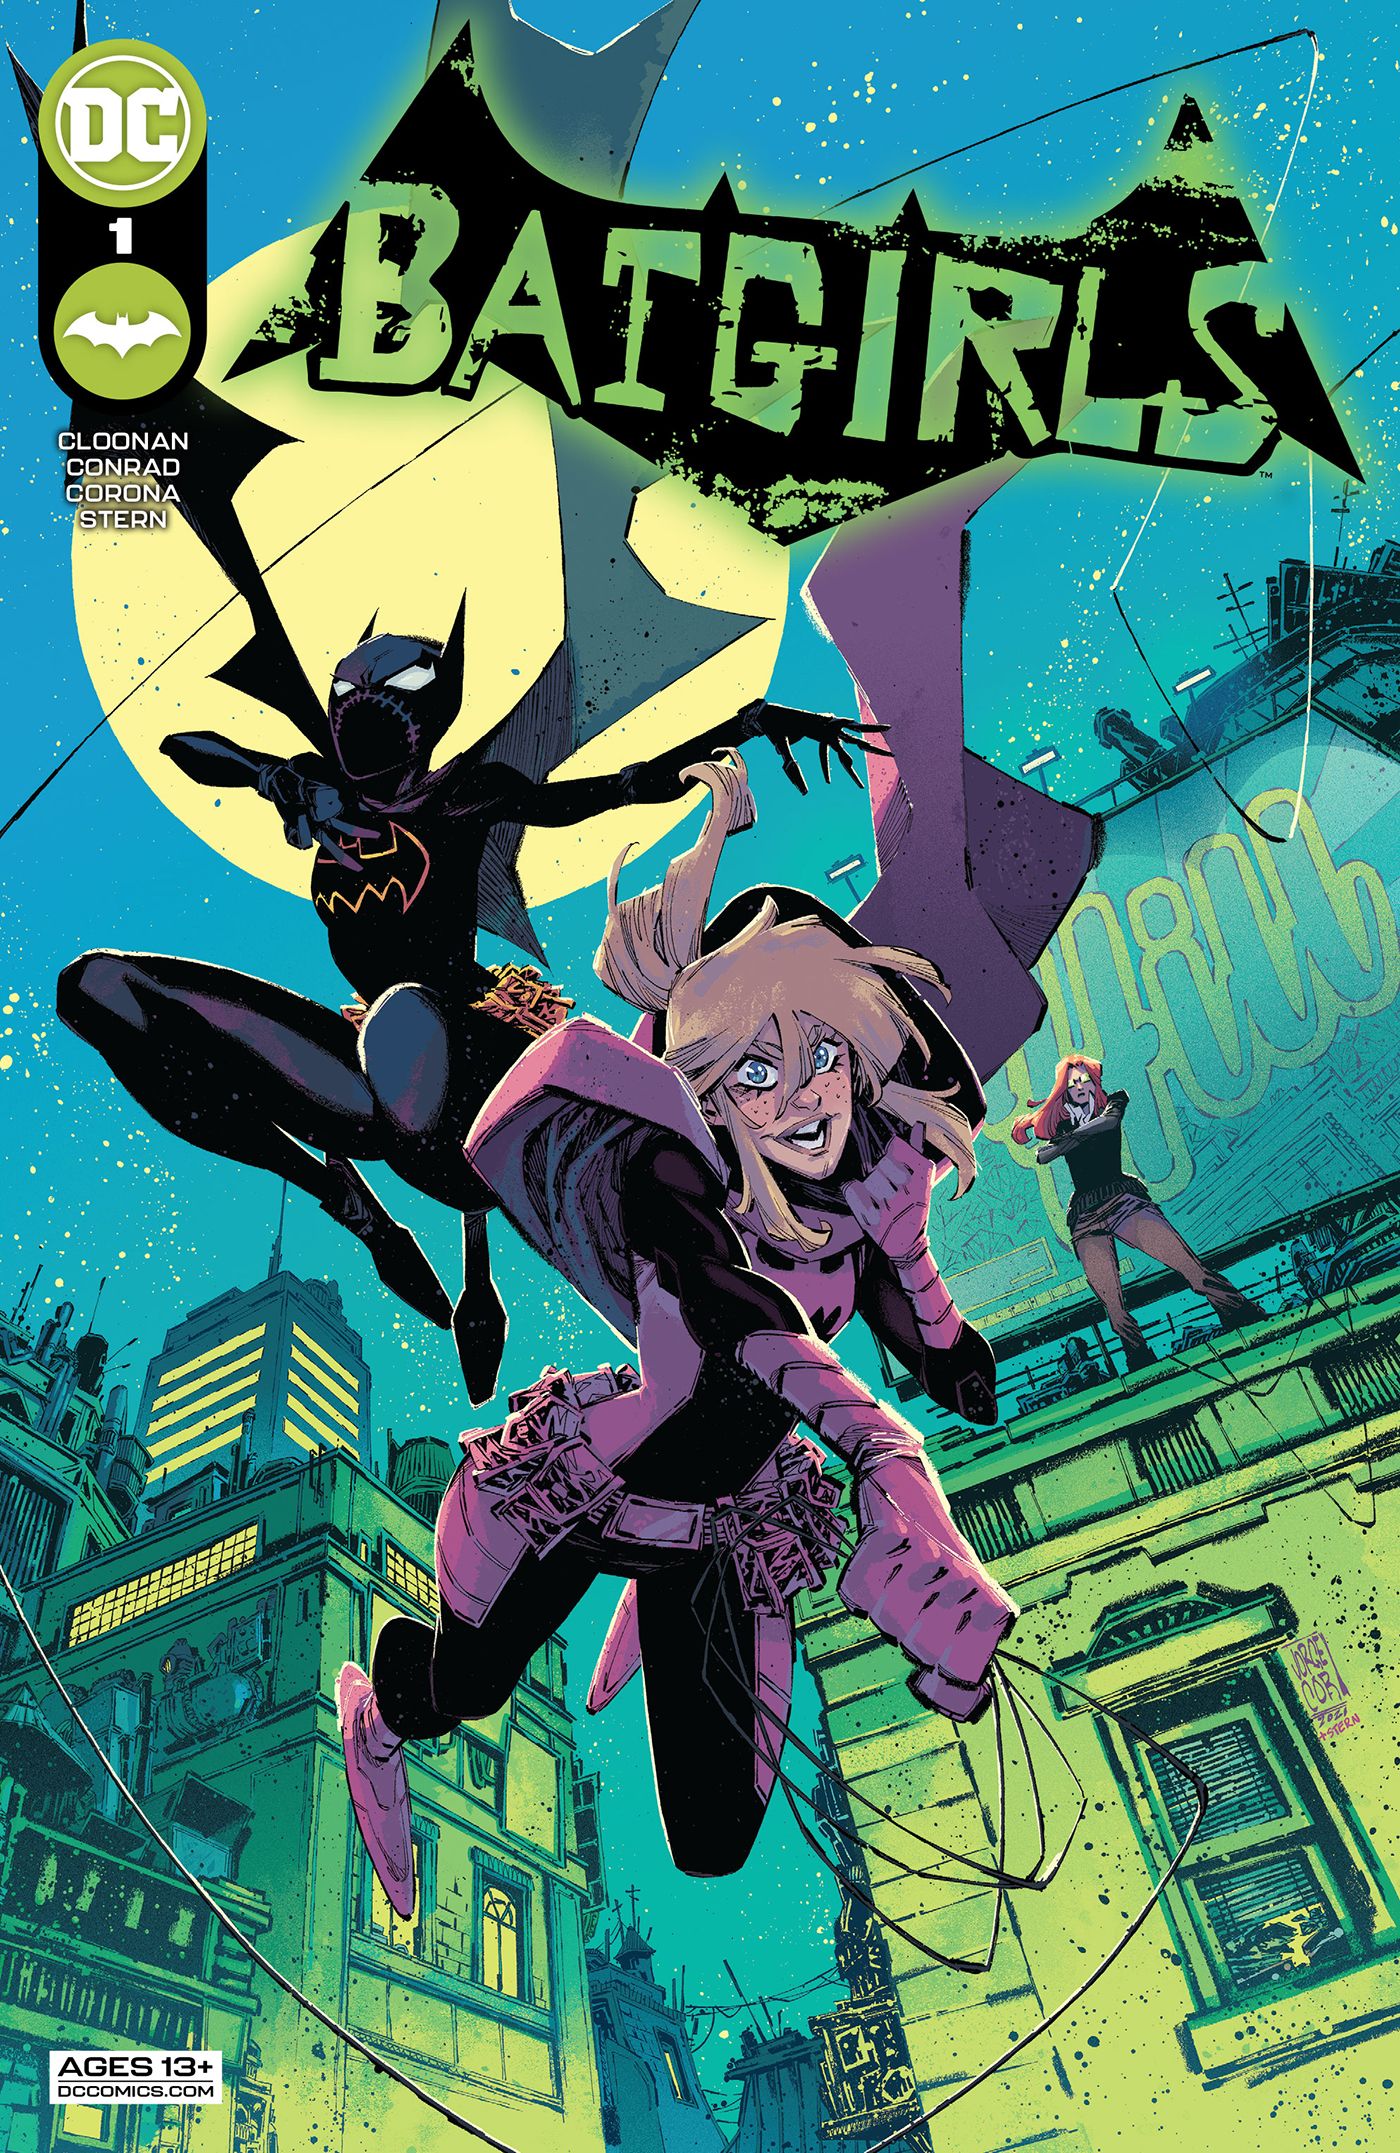 Stephanie Brown and Cassandra Cain swing through the night on the cover of Batgirls #1.